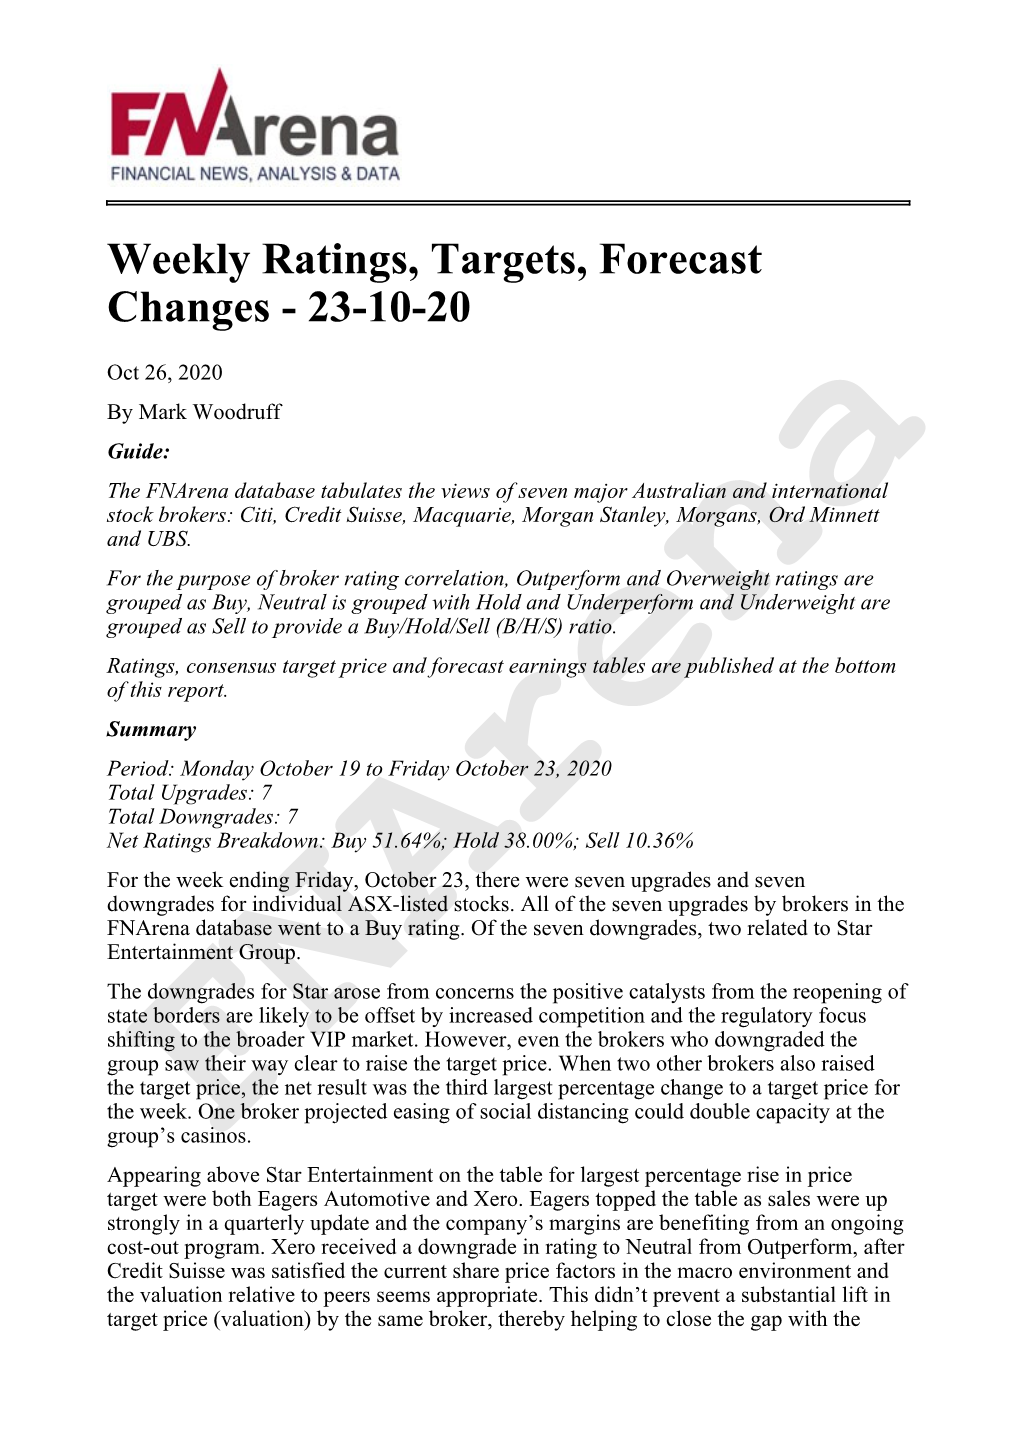 Weekly Ratings, Targets, Forecast Changes - 23-10-20